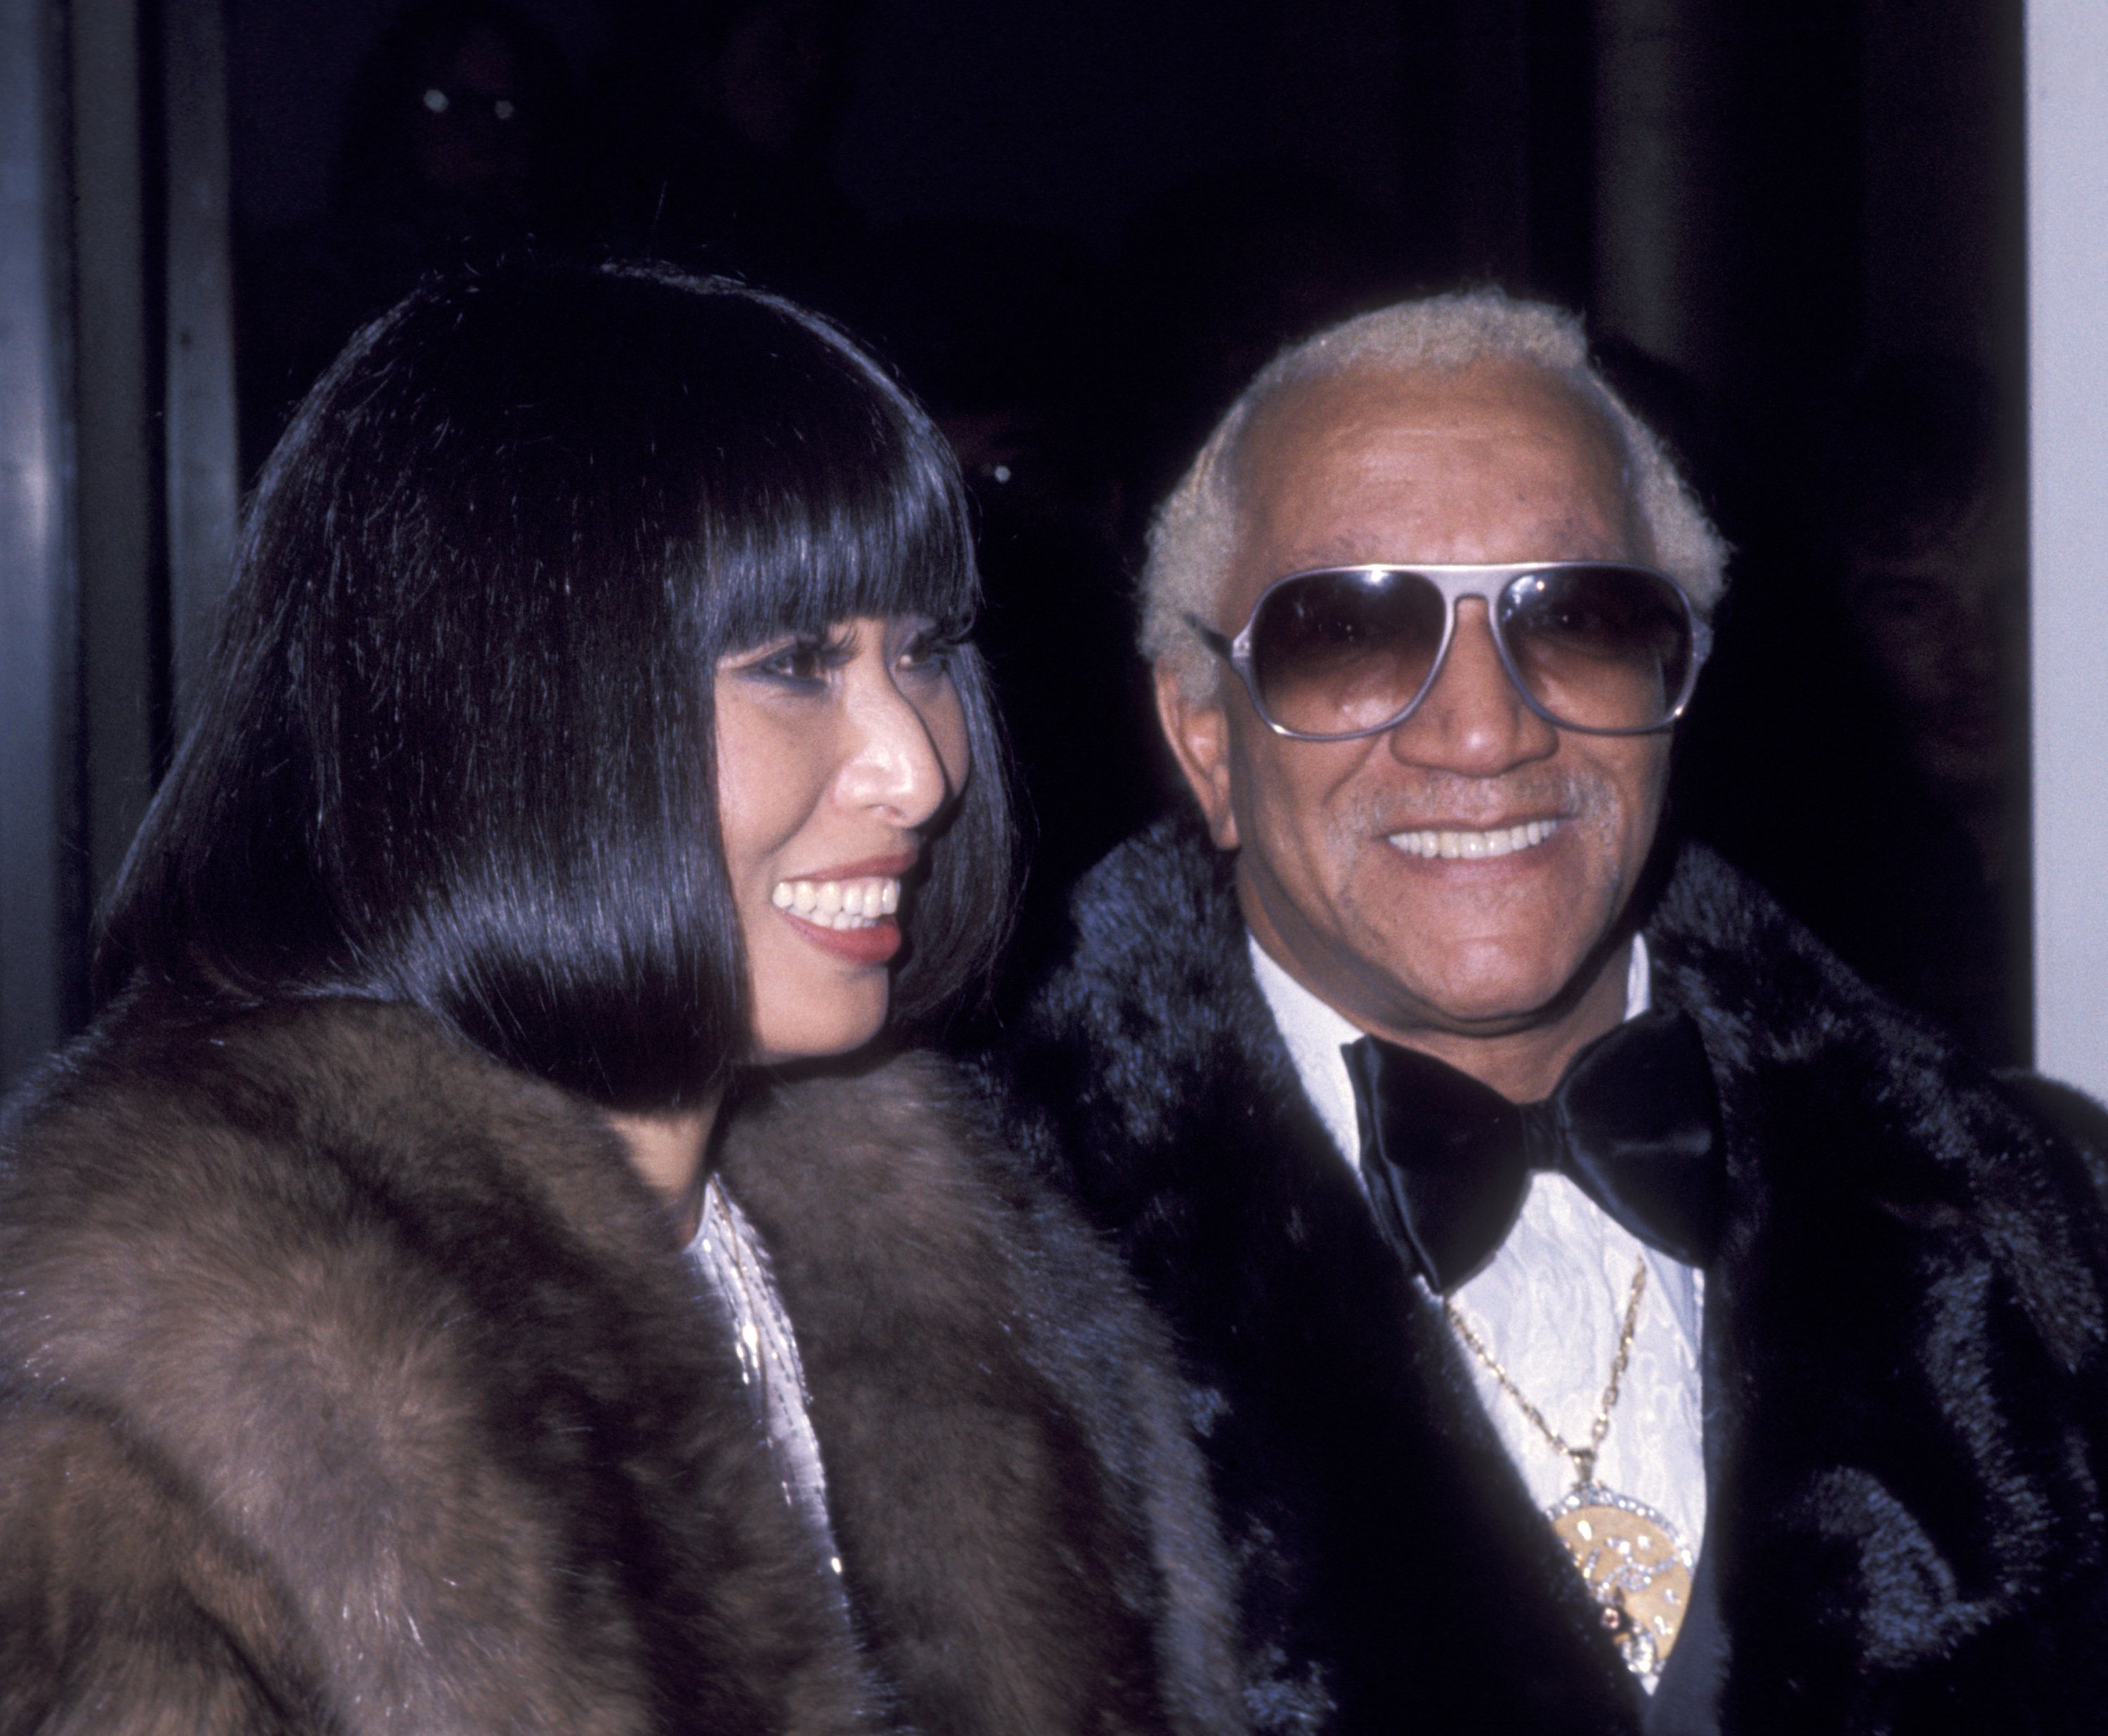 Actor Red Foxx and wife Yu Chi Chung attend CBS TV Taping of Jimmy Carter Inaugural Gala on January 19, 1977 at the Kennedy Center in Washington, D.C. | Source: Getty Images